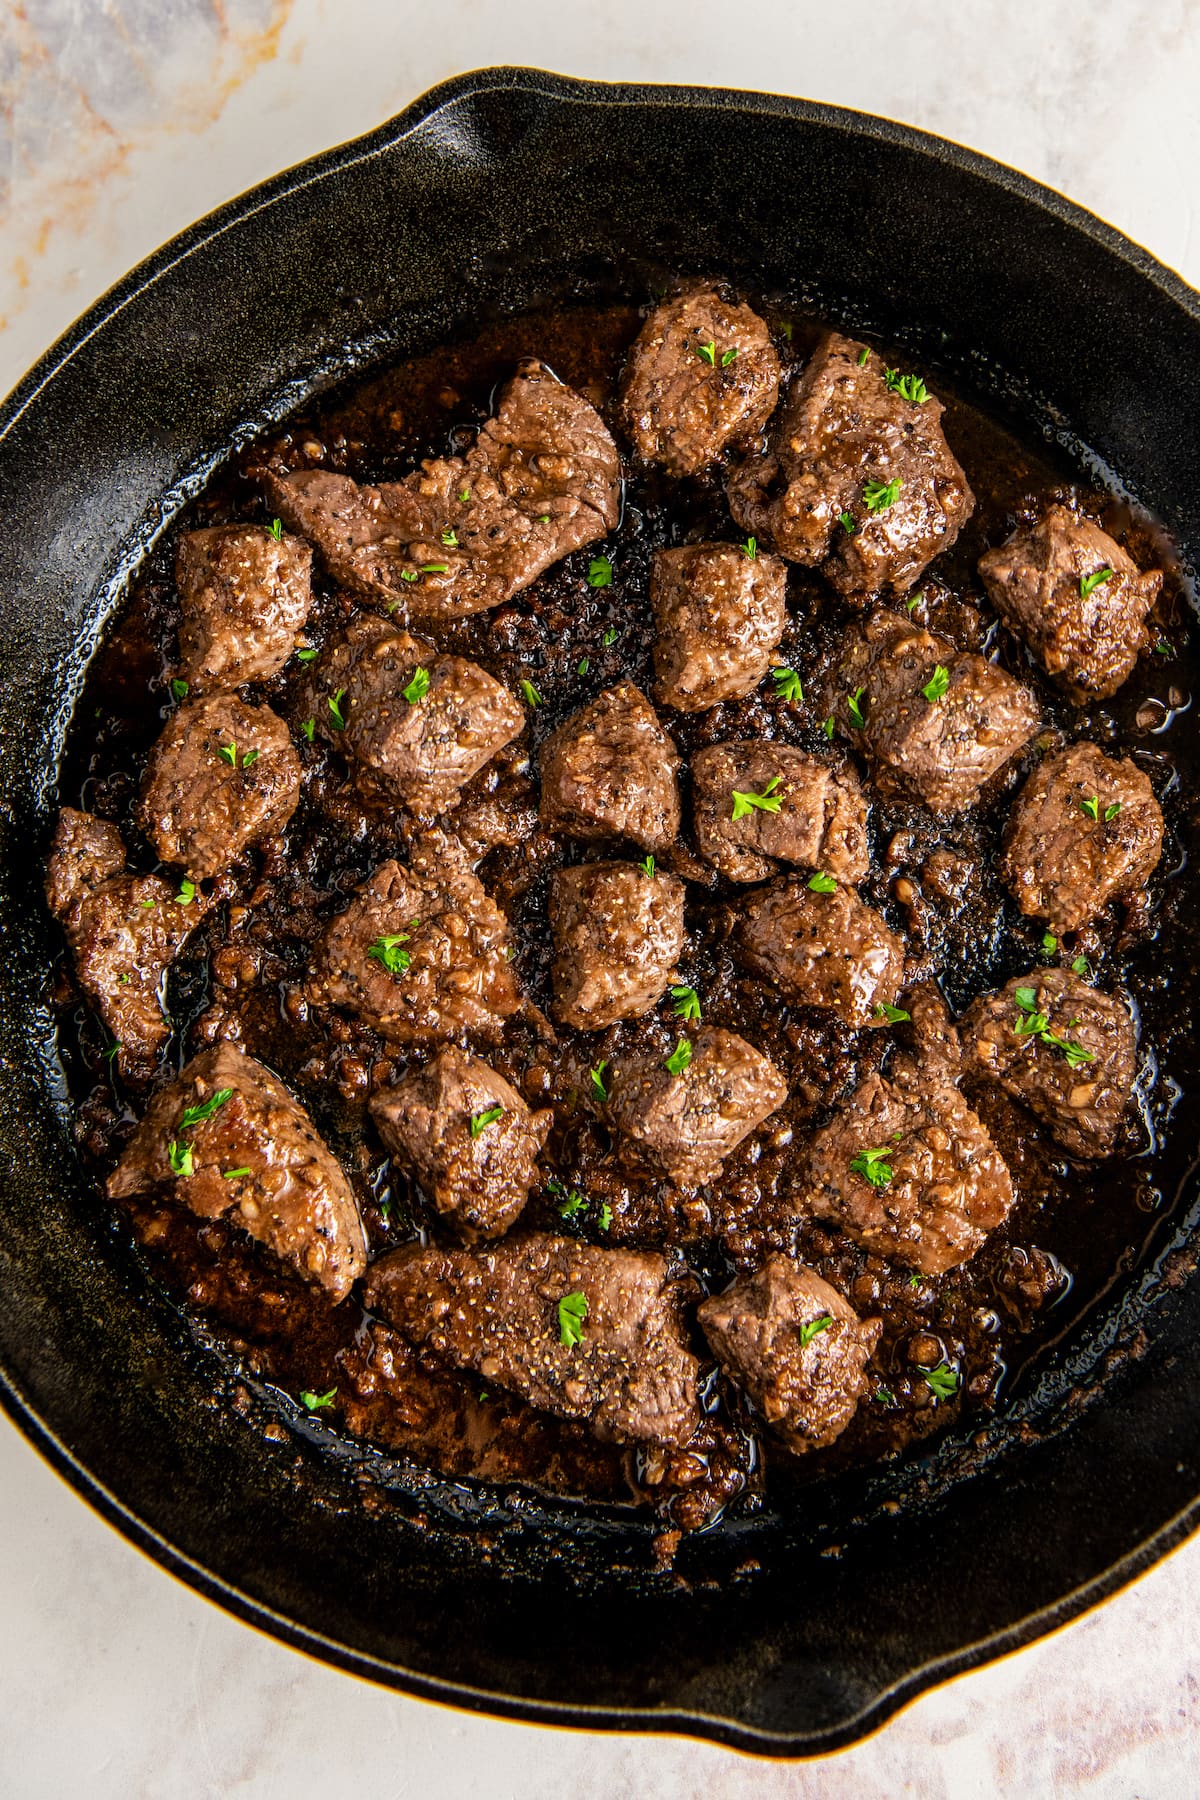 Overhead view of garlic butter steak bites cooking in a sauce in a heavy bottomed skillet.